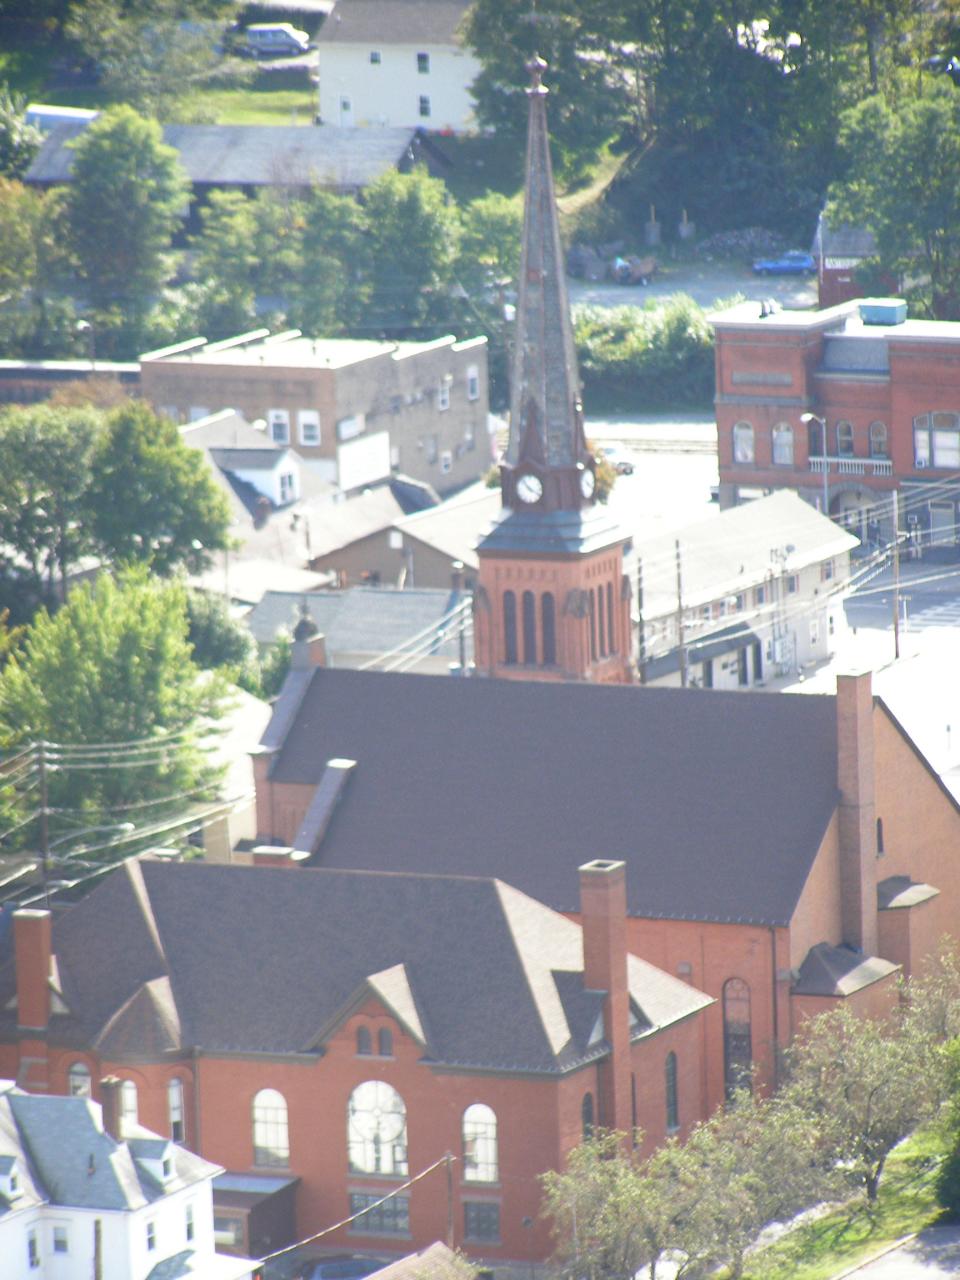 1st Presbyterian Church and Chapel, as seen from Irving Cliff in Honesdale.